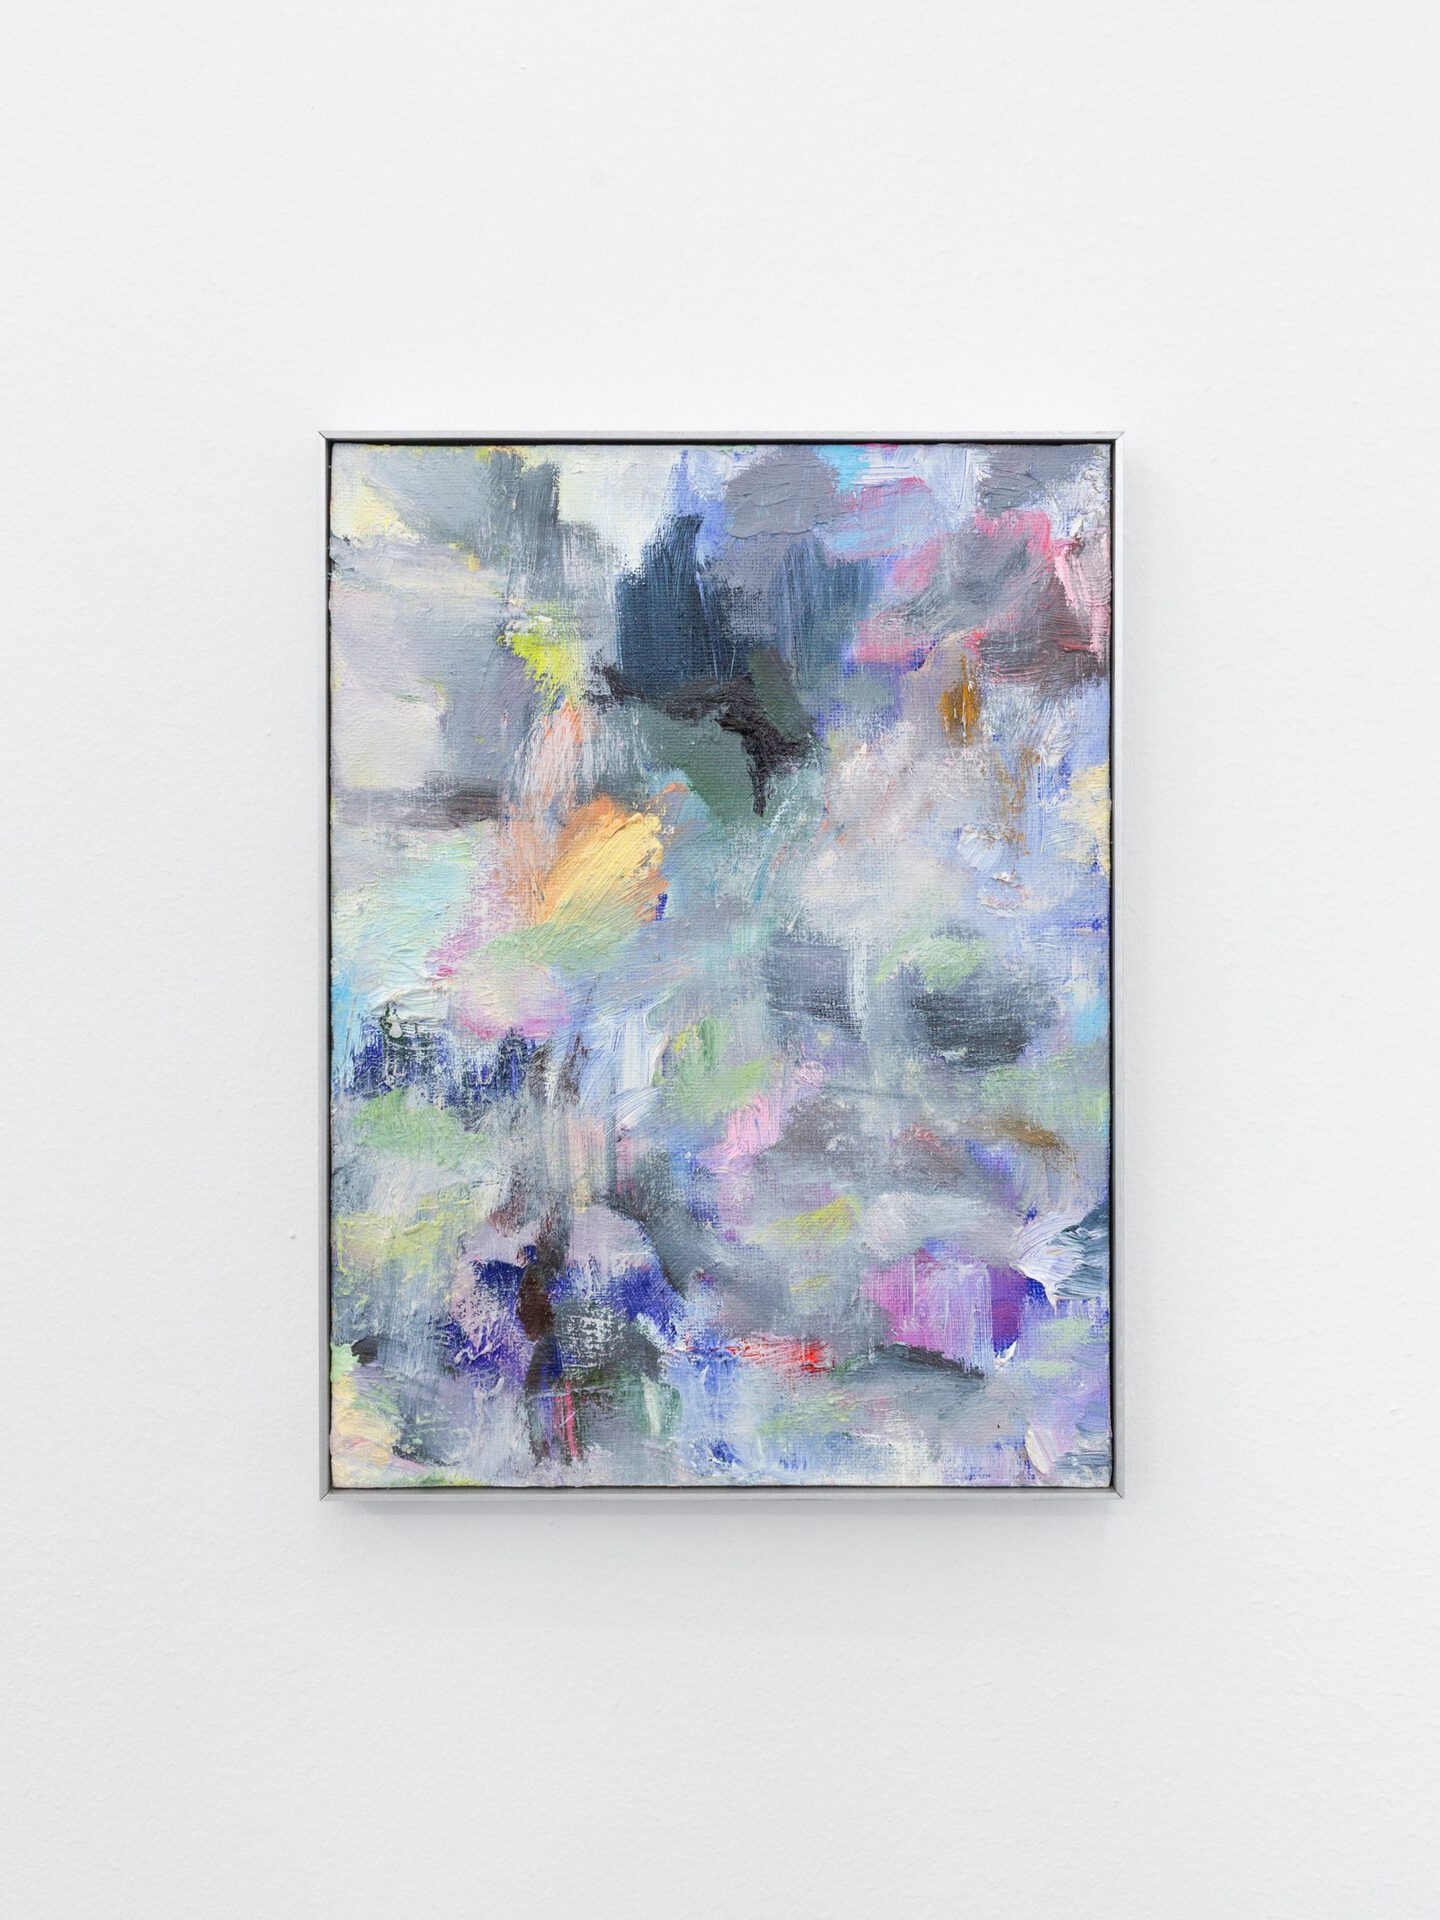 Heike-Karin Föll, glow, 2020-22, oil and powdered pastel on canvas board, aluminium frame, 25 x 18 cm. Courtesy of the artist and Gunia Nowik Gallery.